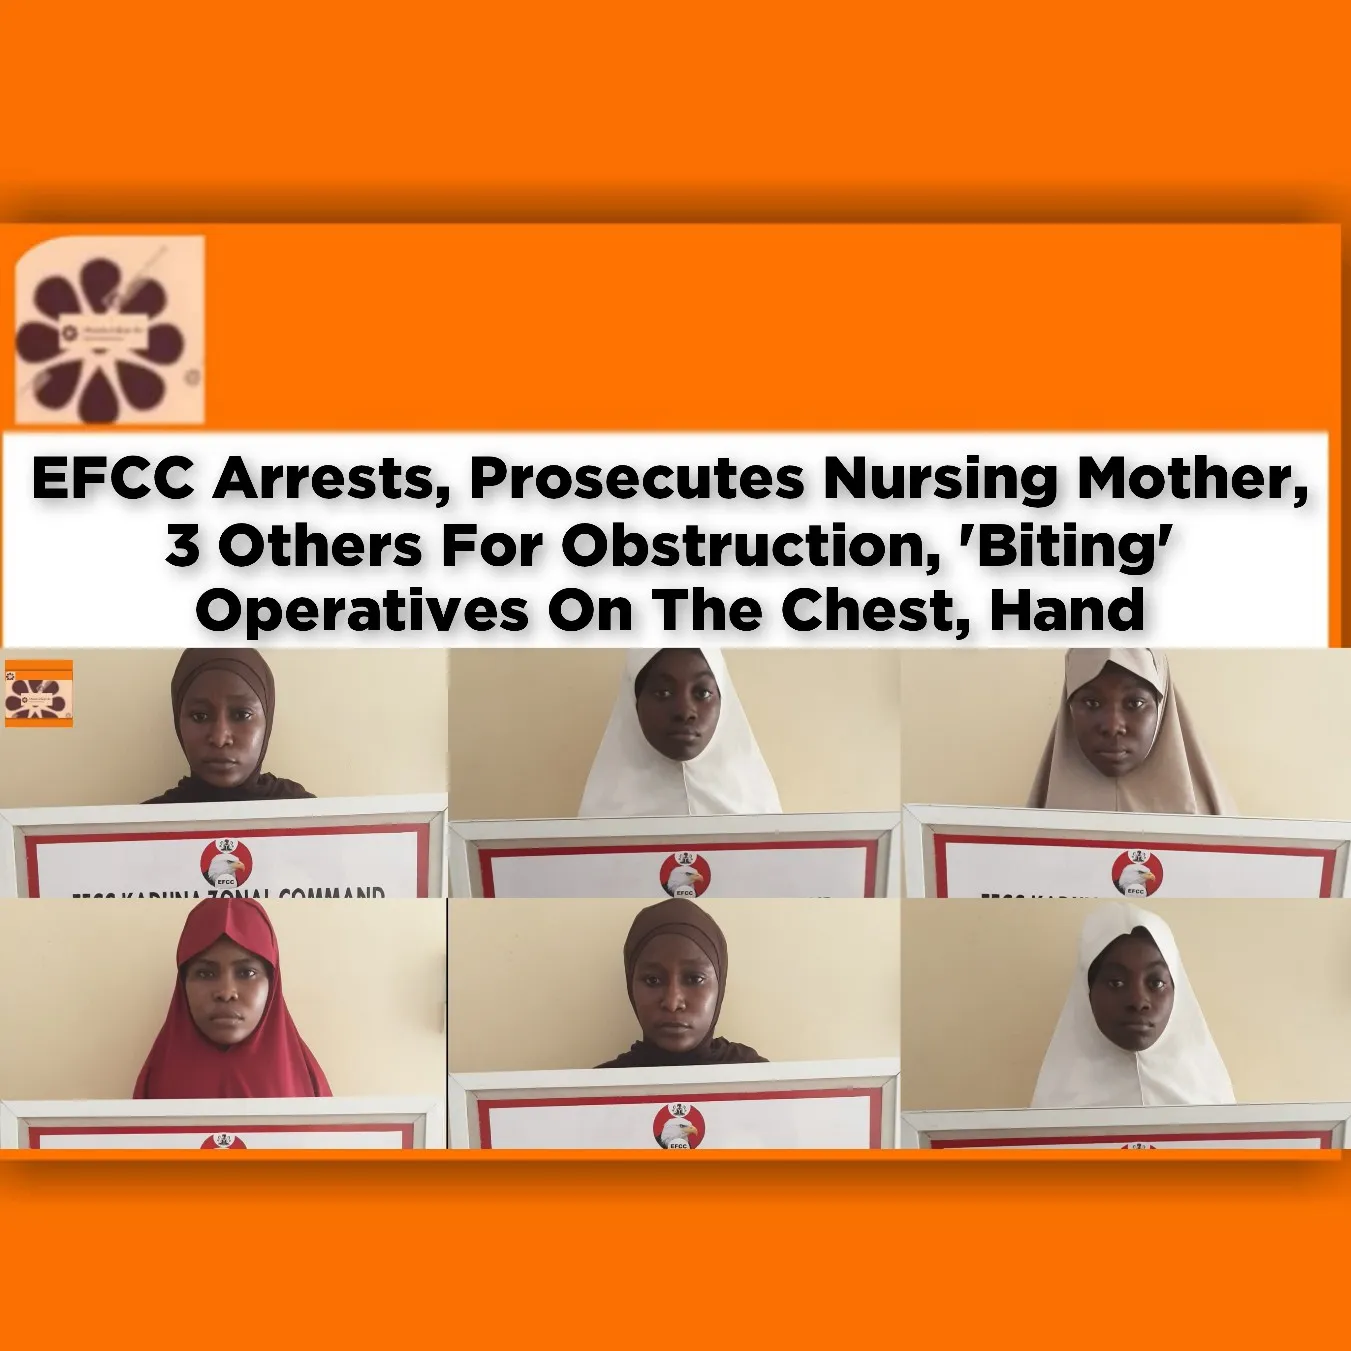 EFCC Arrests, Prosecutes Nursing Mother, 3 Others For Obstruction, 'Biting' Operatives On The Chest, Hand ~ OsazuwaAkonedo #America